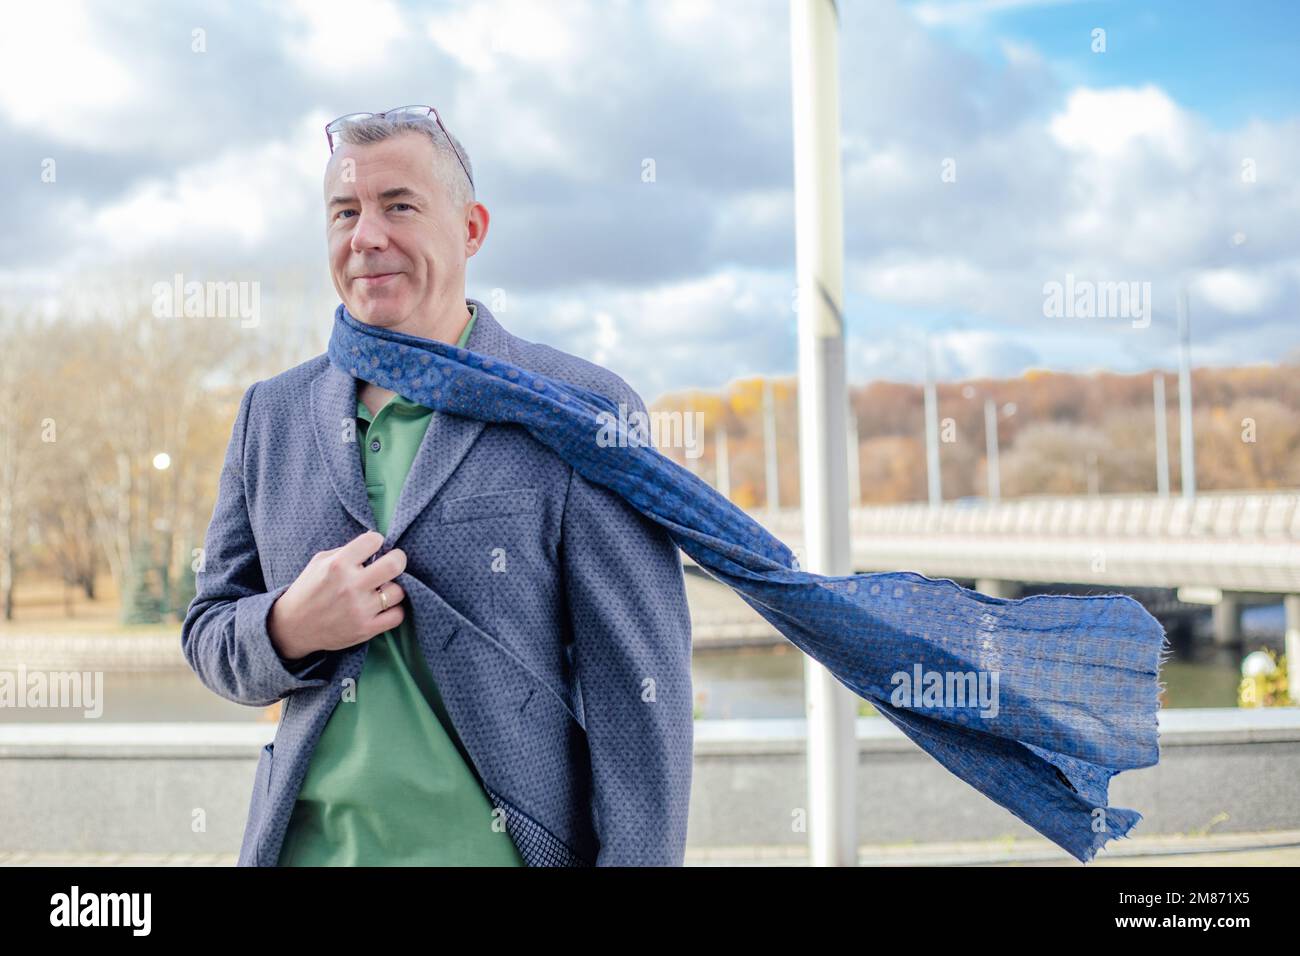 Satisfied, confident, smiling grizzled businessman with eyeglasses on head in warm jacket, scarf walk, shiver on street Stock Photo